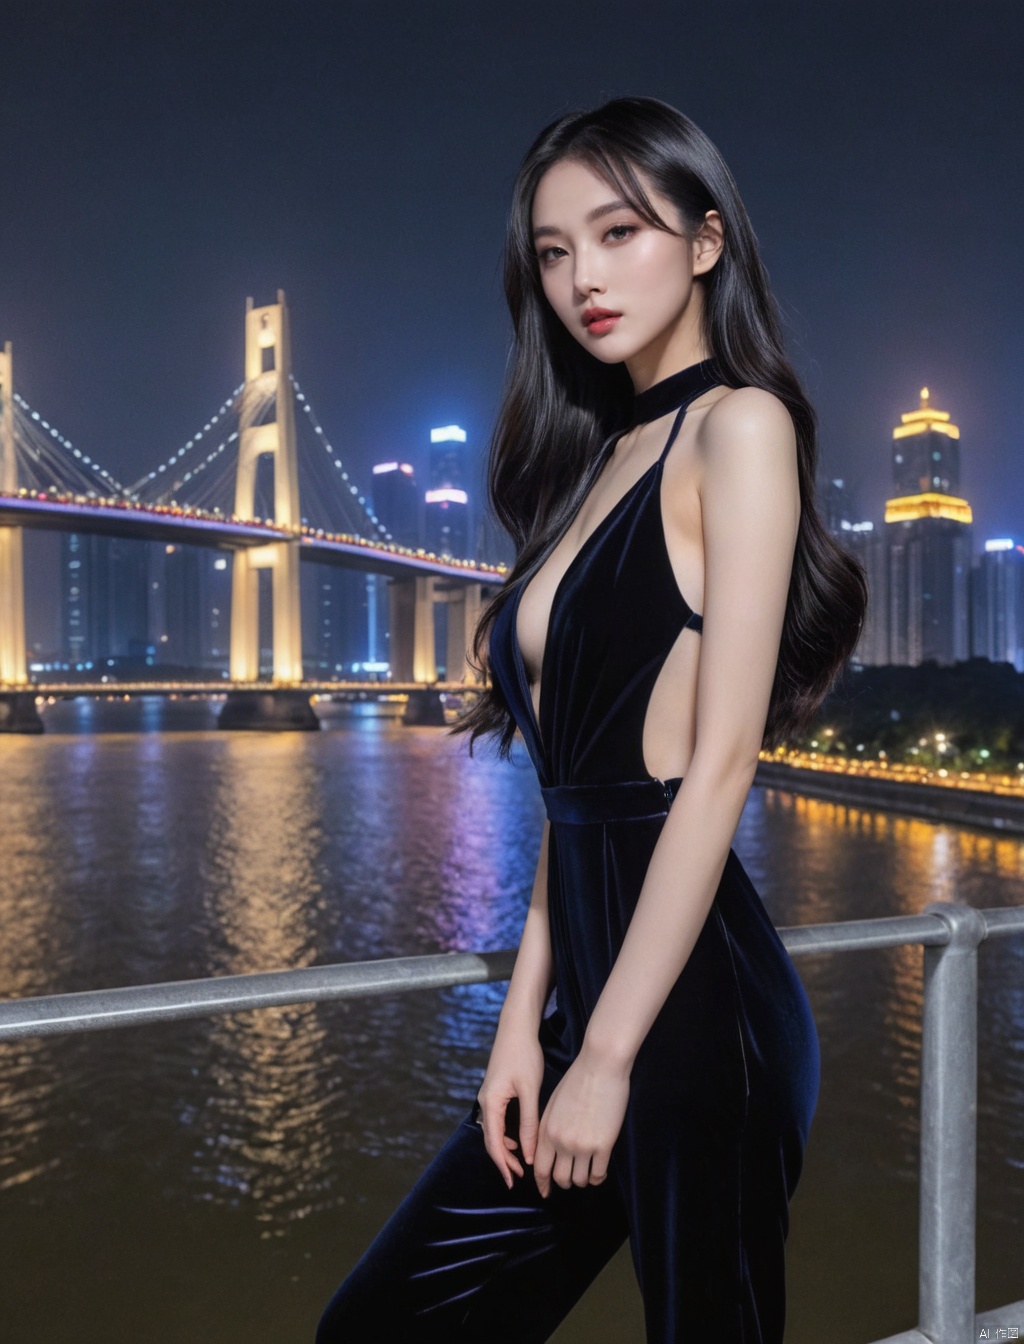  scenery,city,building, cityscape,skyscraper, night,city lights,outdoors,bridge,science fiction, water,chongqing,1girl,long hair, black hair, lips, realistic,Velvet jumpsuit, plunging neckline, heels,large breasts,cleavage, arafed image of a woman,very pretty model, chinese girl, she is korean, lariennechan, 1 8 yo, beautiful asian girl, lovely woman, pretty face, asian decent, slender girl, attractive girl, gorgeous chinese model,photoshop \(medium\), realistic,best quality, high quality,
Half body photo